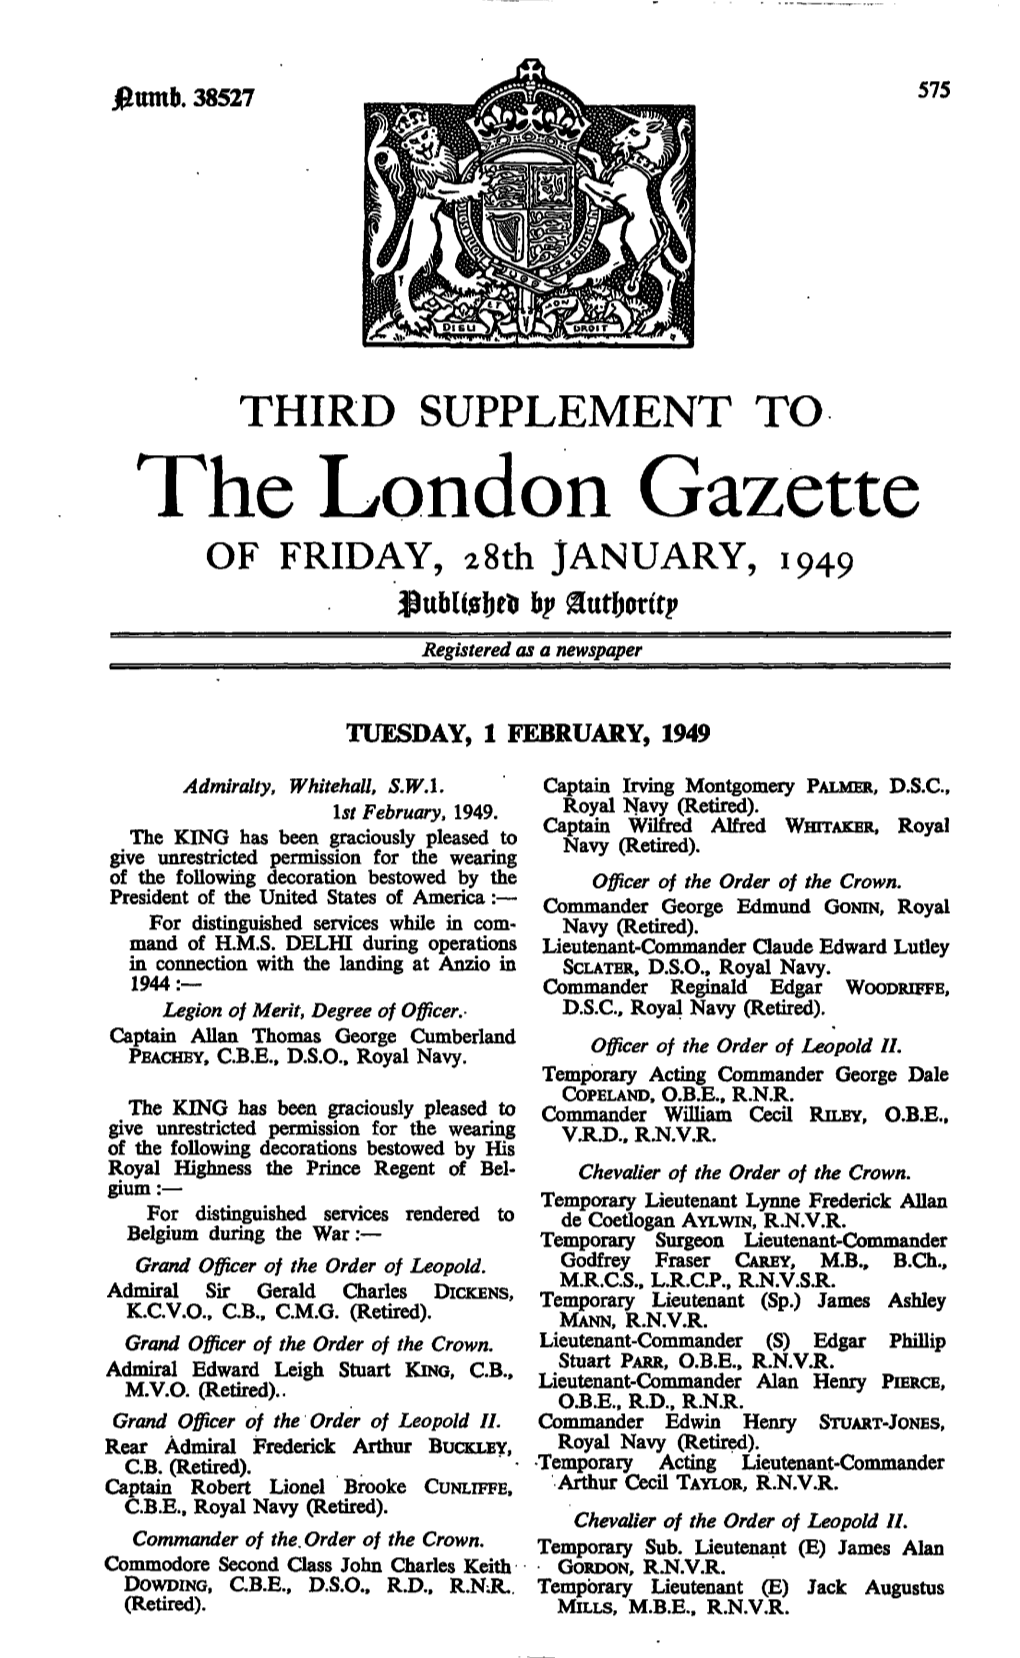 The London Gazette of FRIDAY, 28Th JANUARY, 1949